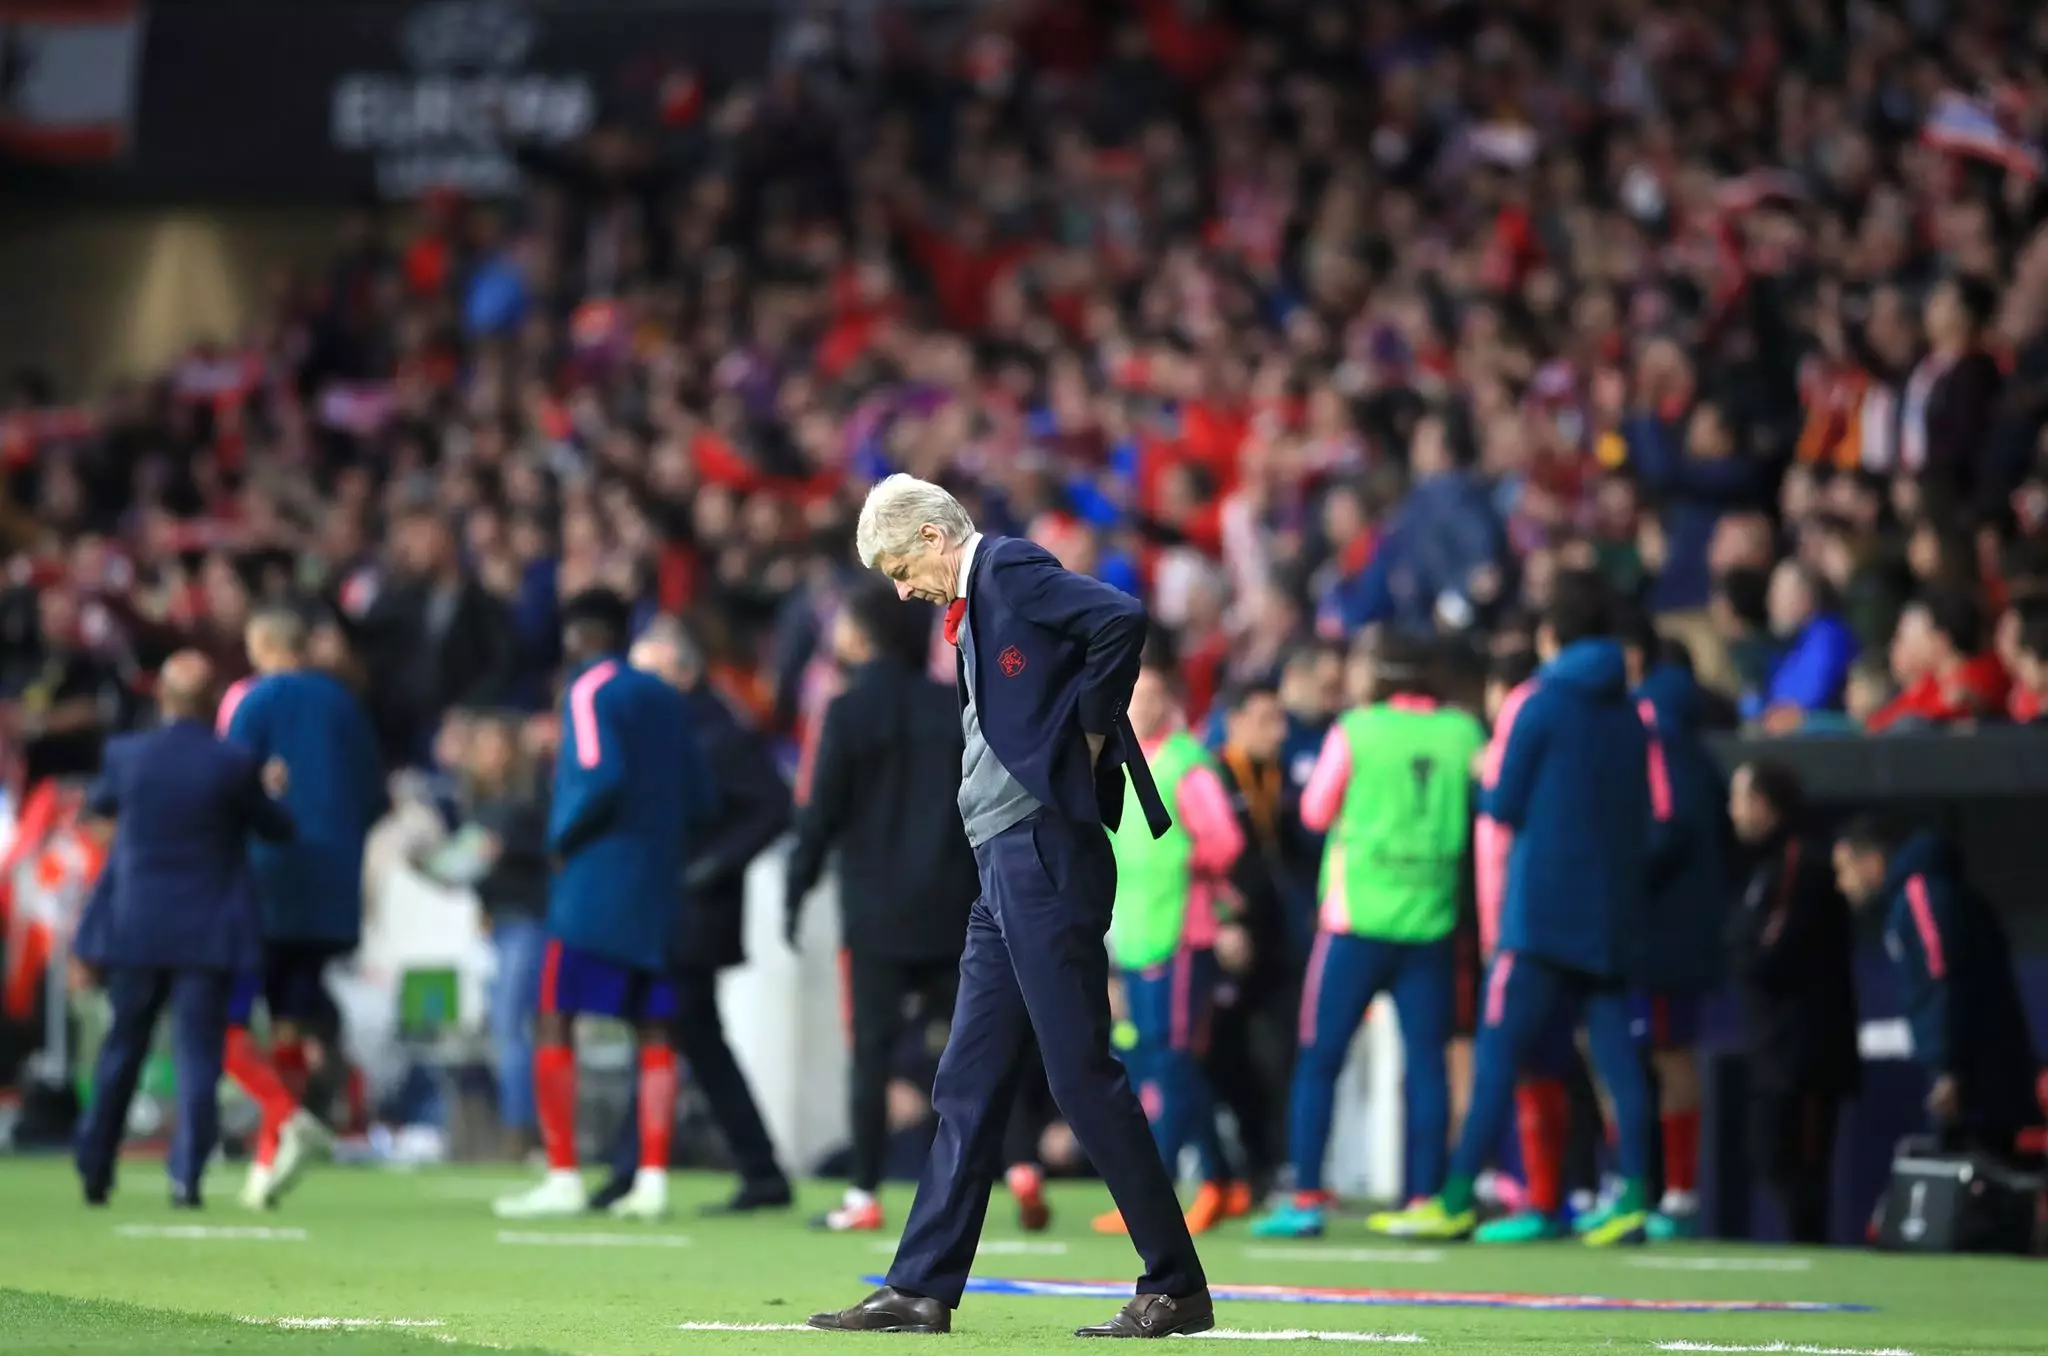 Wenger cuts a dejected figure. Image: PA